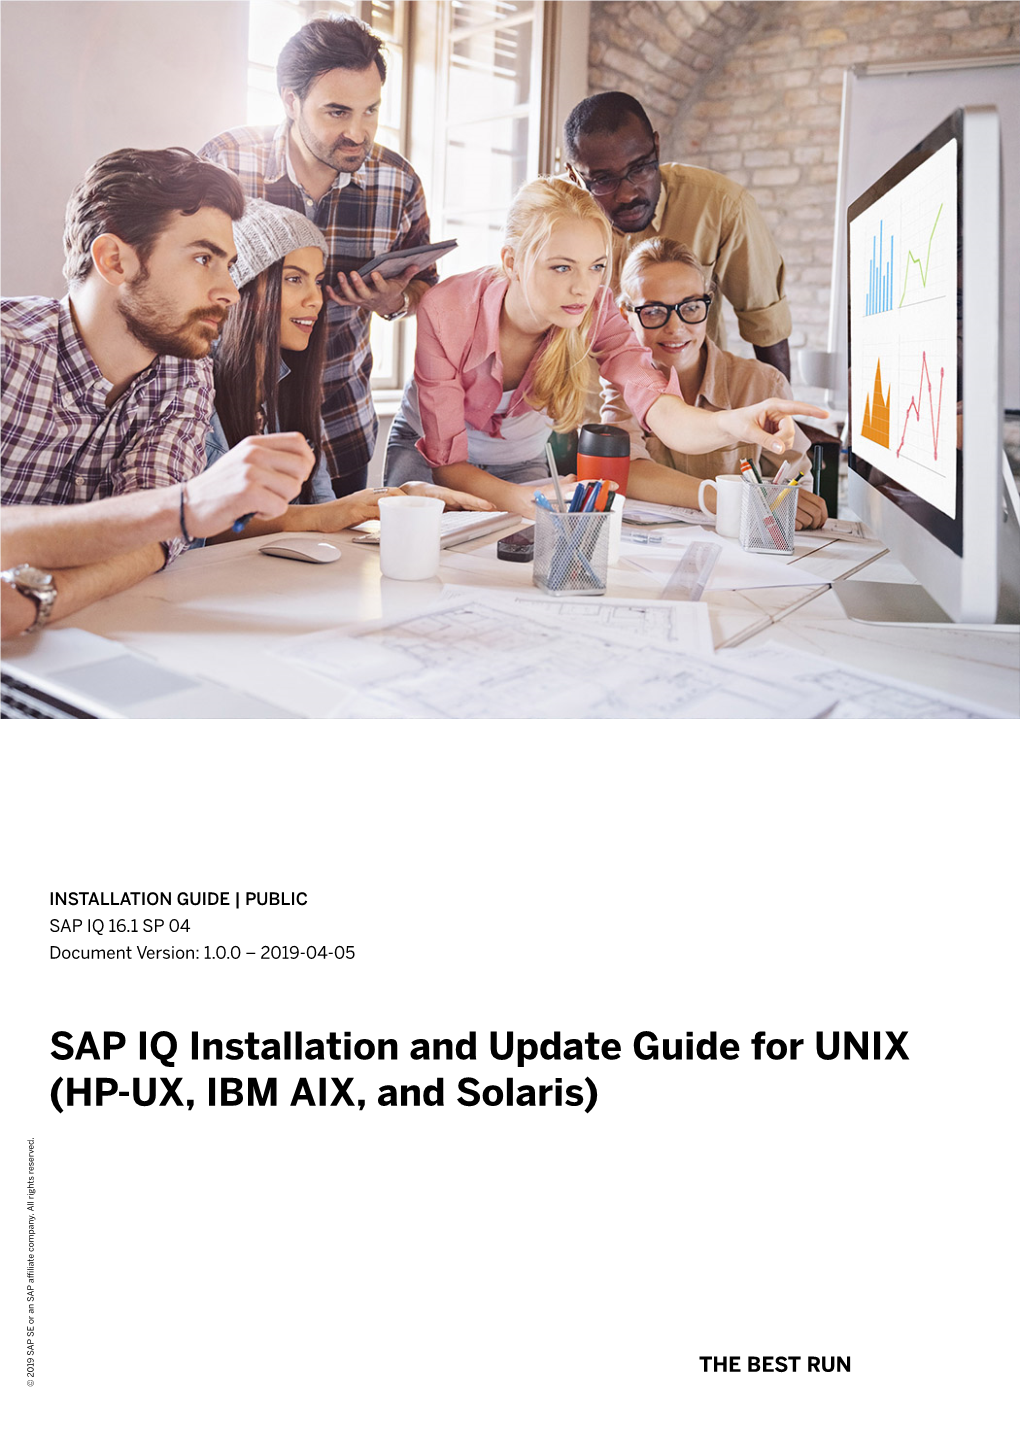 SAP IQ Installation and Update Guide for UNIX (HP-UX, IBM AIX, and Solaris) Company